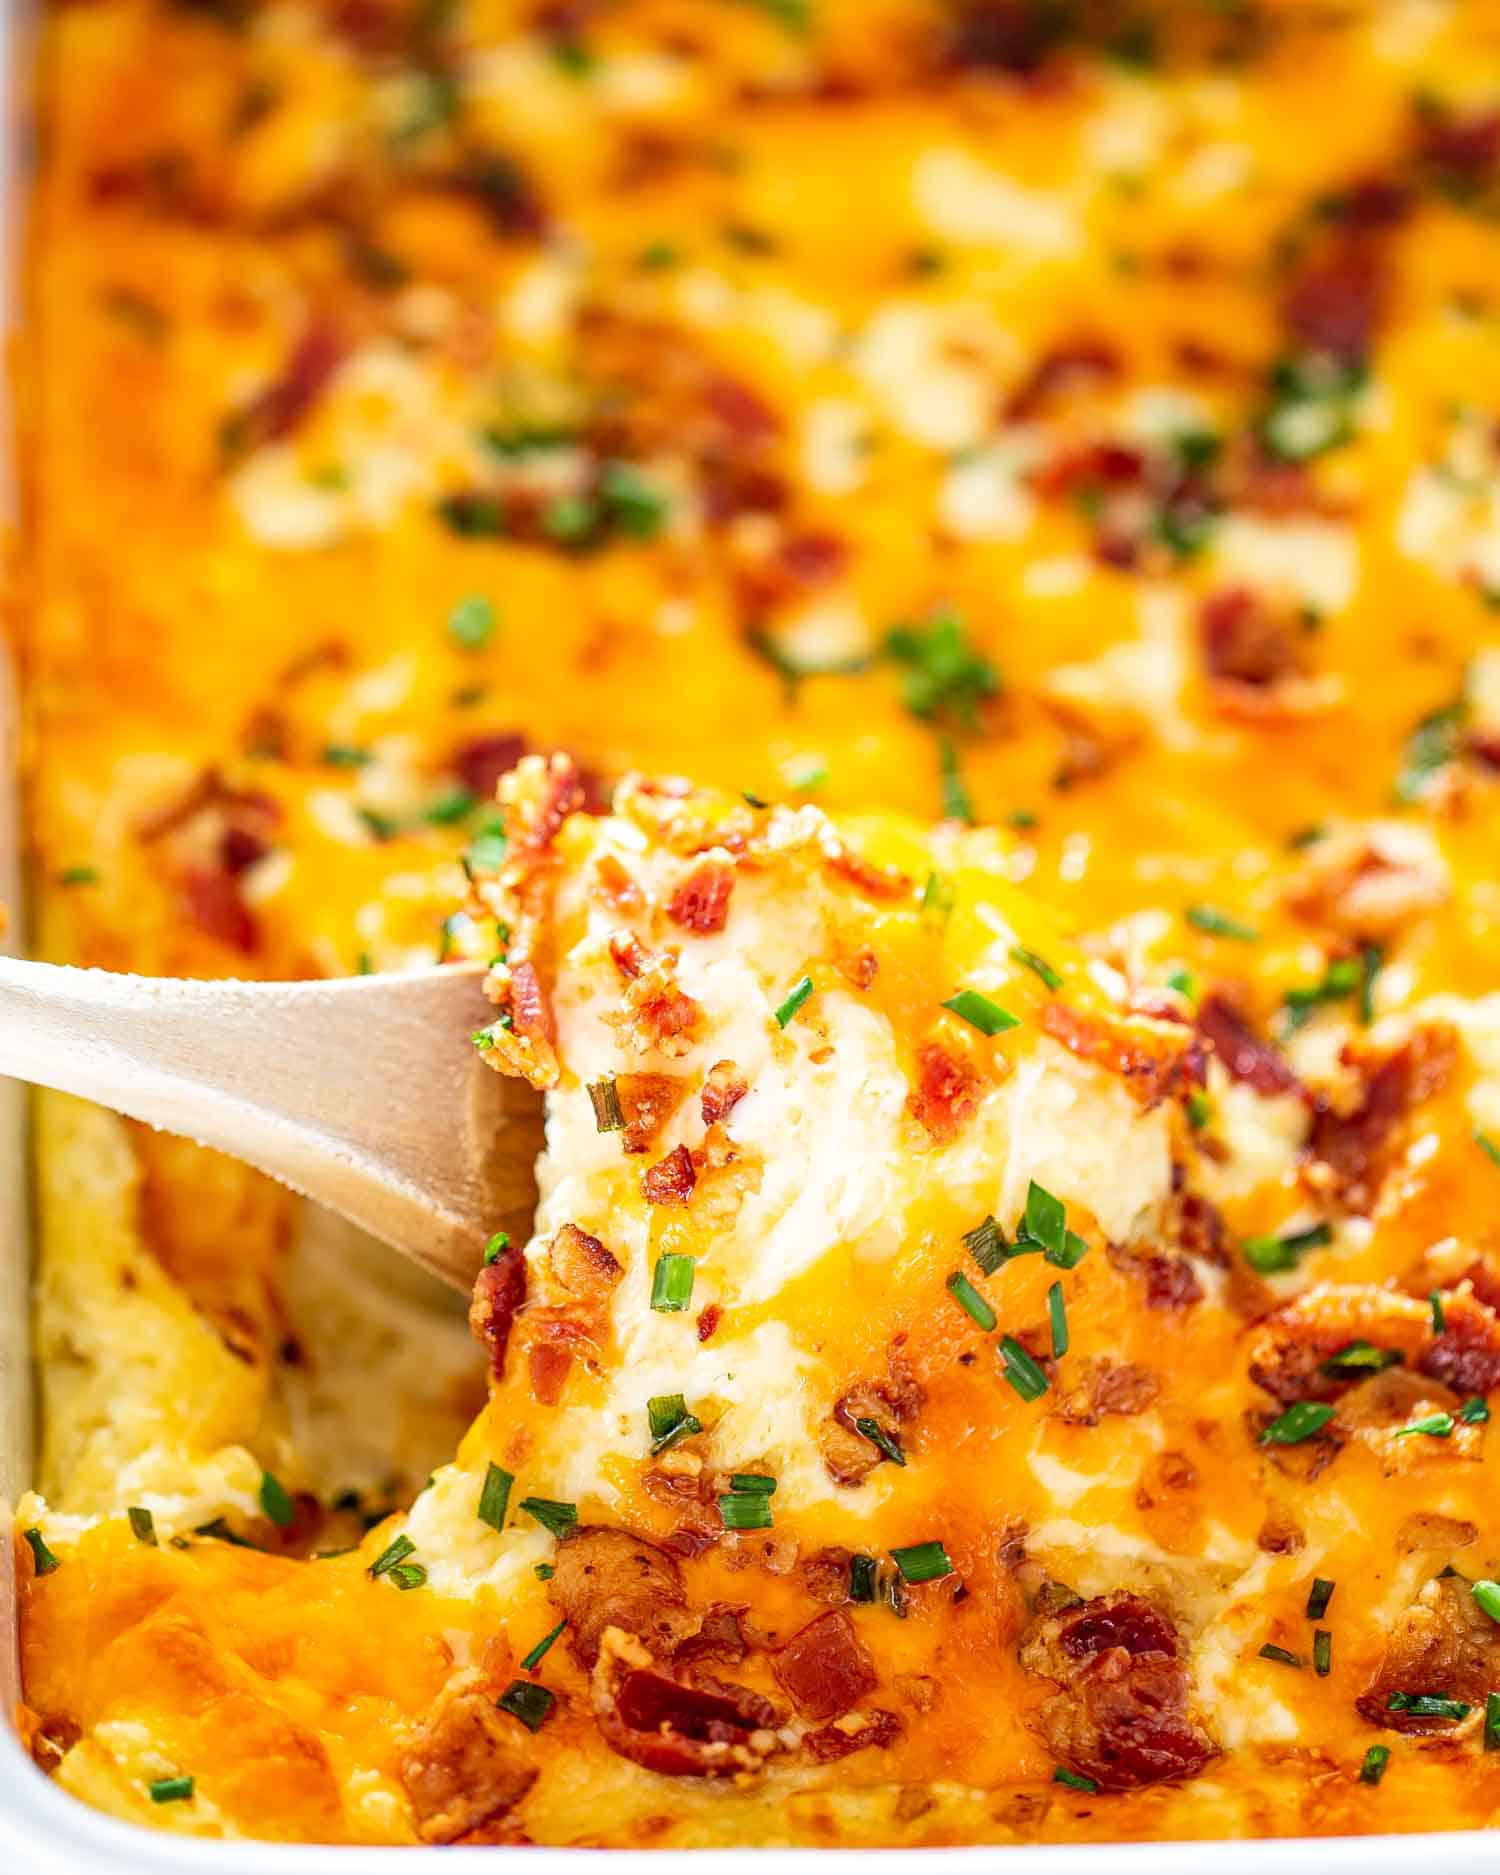 cheesy mashed potatoes in a casserole dish.